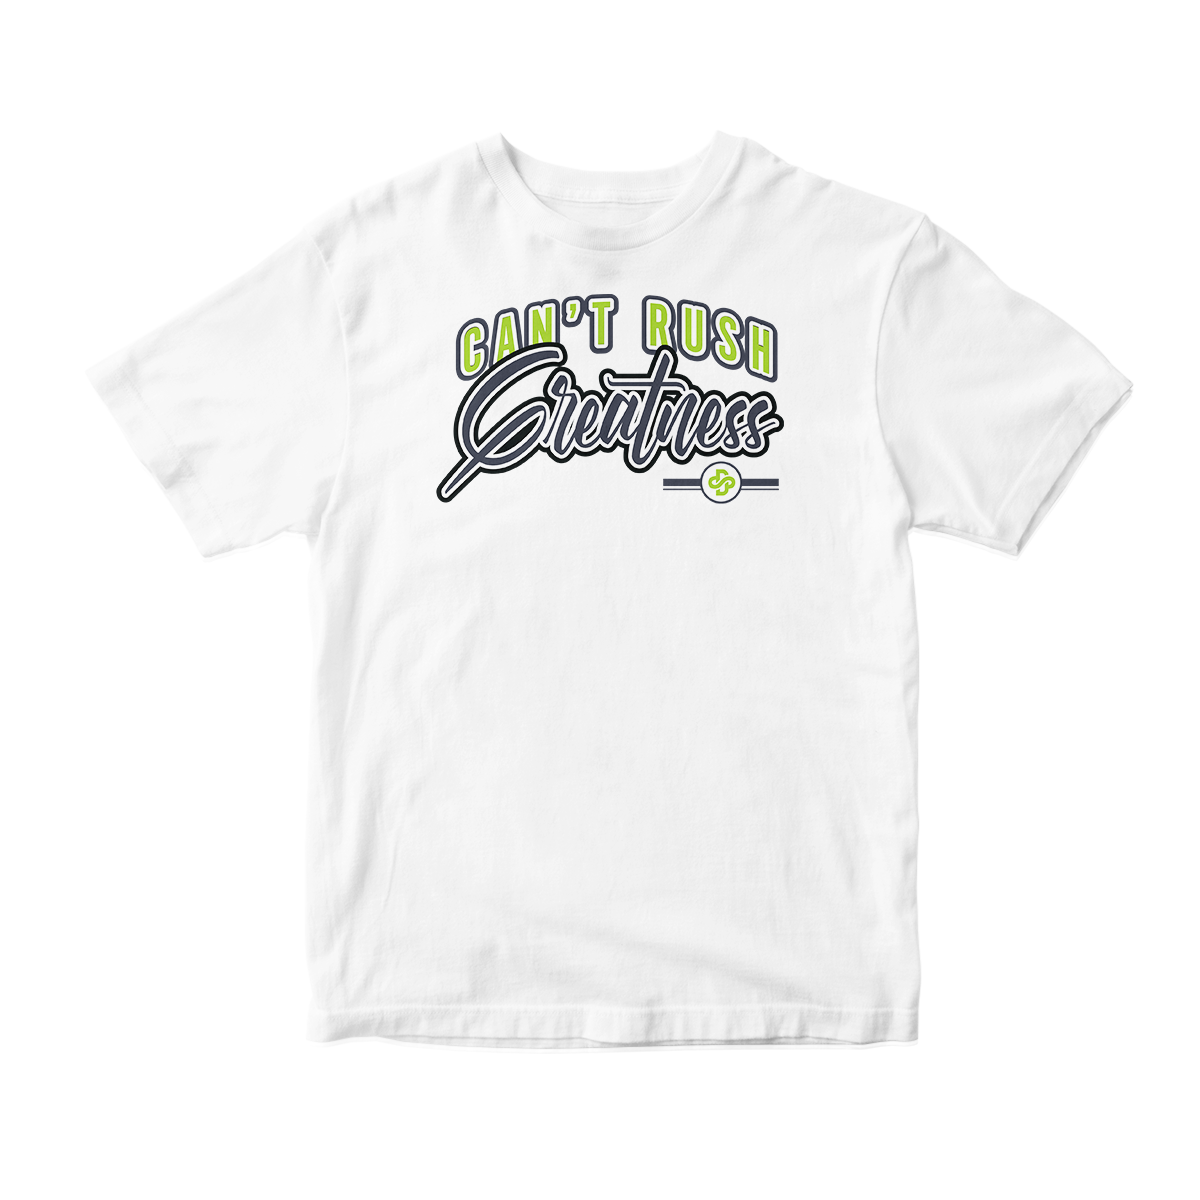 'Can't Rush Greatness' in Neon 4 CW Short Sleeve Tee